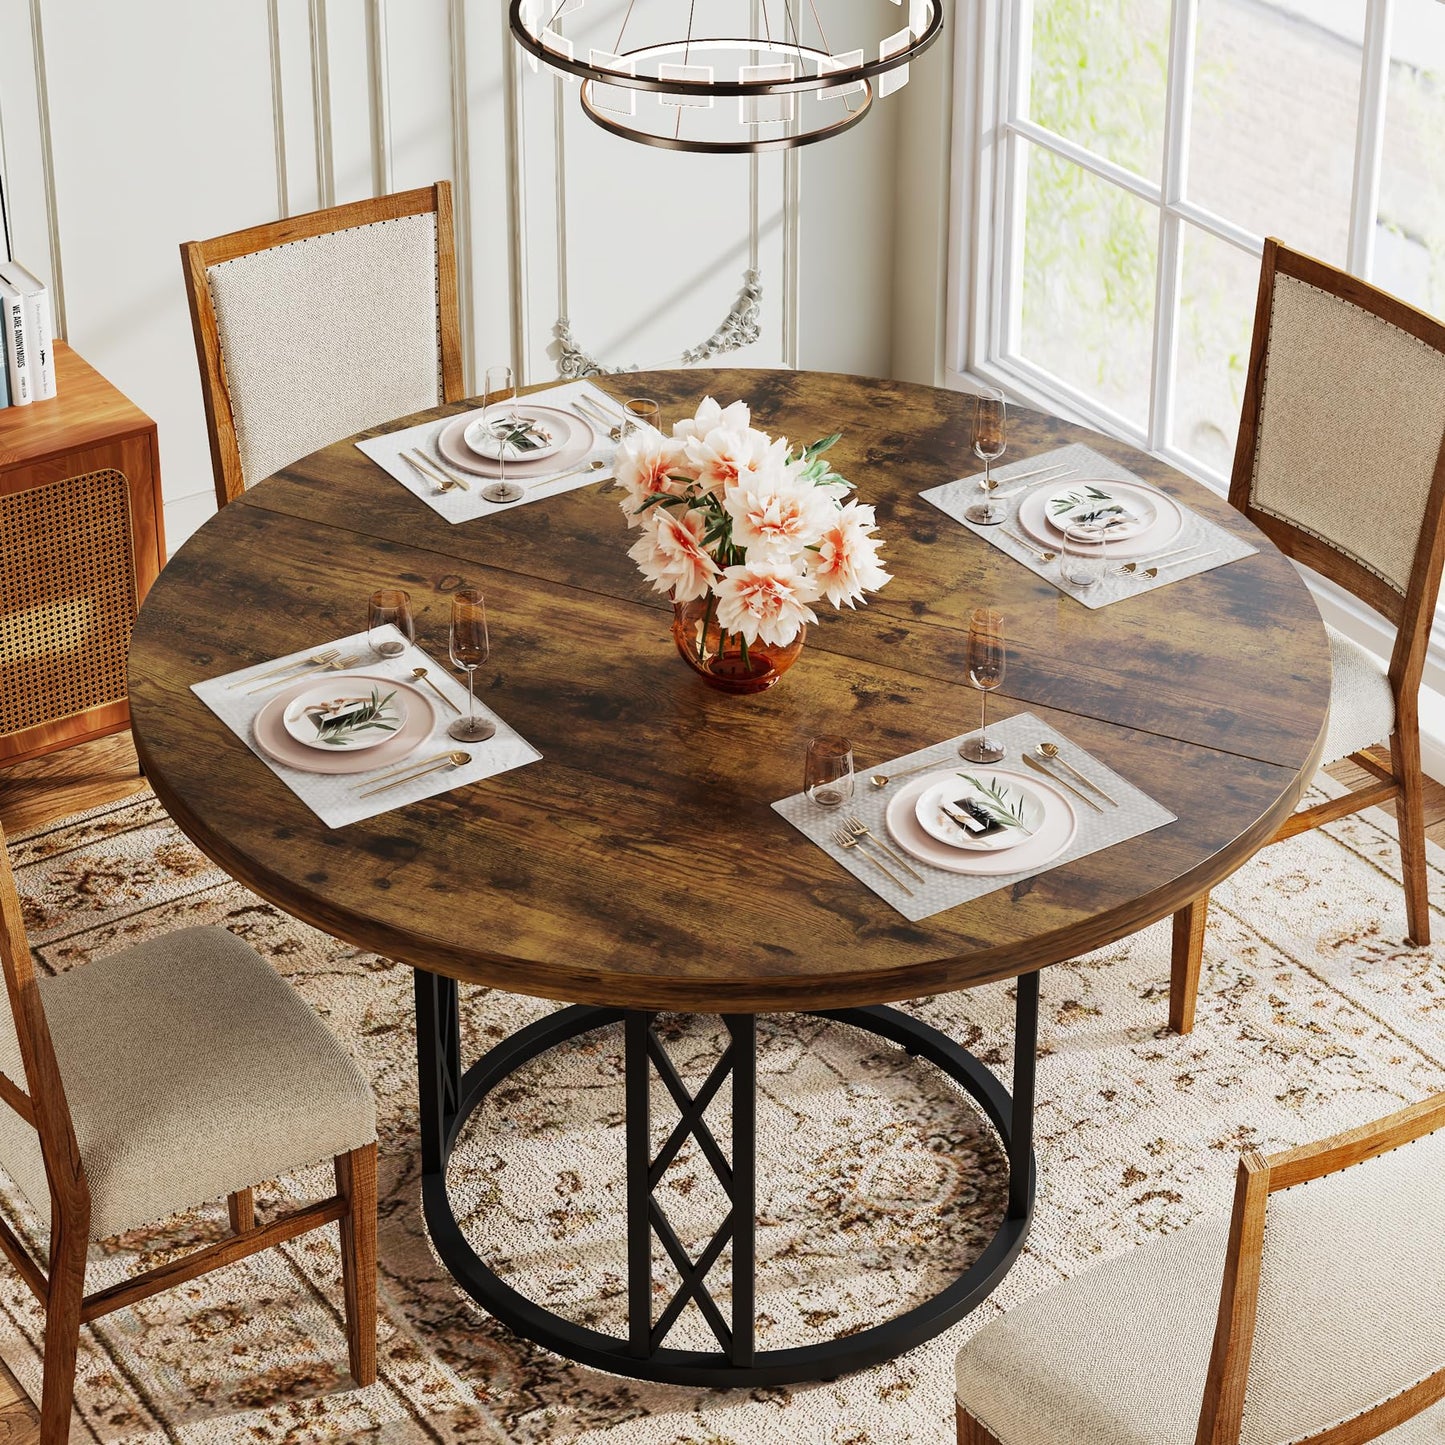 Tribesigns Round Dining Table for 4 People, 47" Modern Kitchen Table with Wood Grain Surface & Metal Base, Rustic Round Table for Dining Room, Living Room, Brown & Black（Only Table）